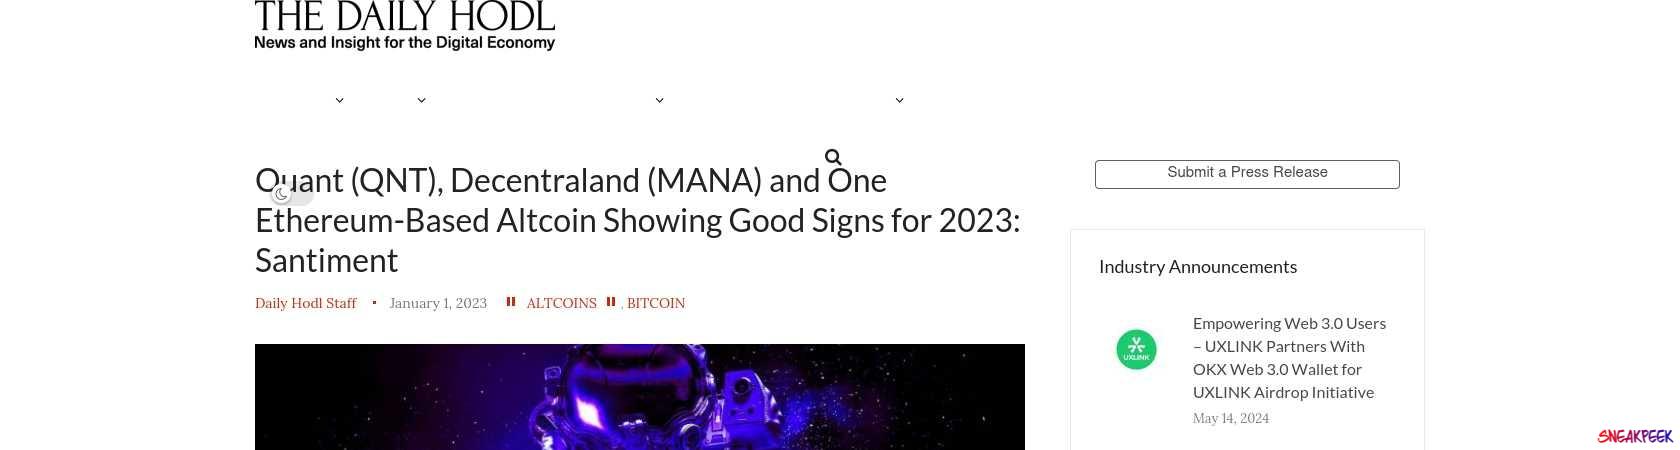 Read the full Article:  ⭲ Quant (QNT), Decentraland (MANA) and One Ethereum-Based Altcoin Showing Good Signs for 2023: Santiment